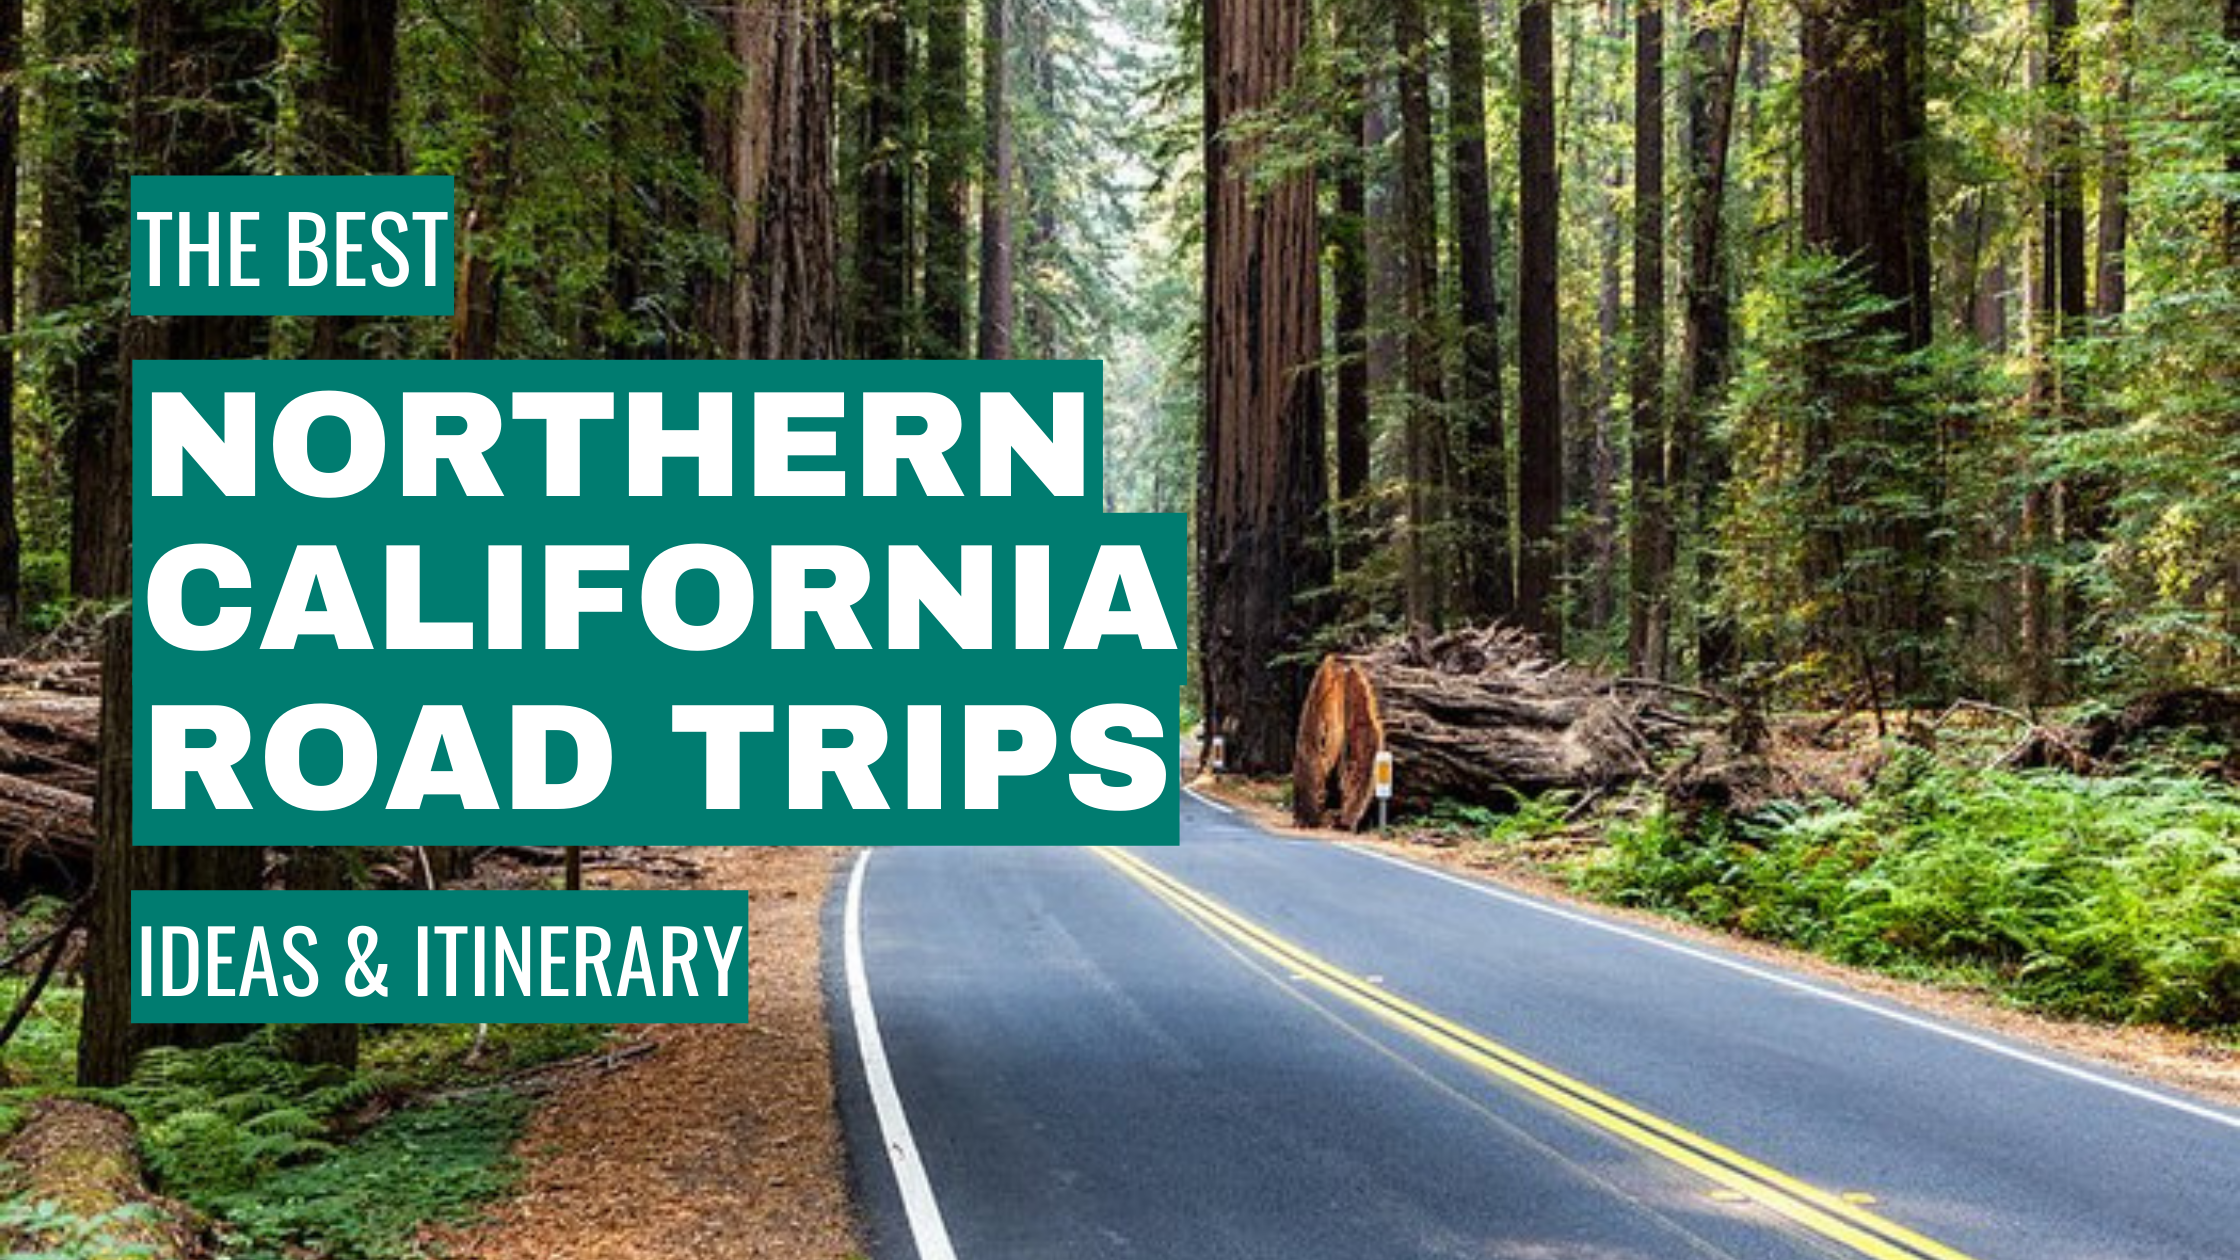 Northern California Road Trip Ideas: 11 Best Road Trips + Itinerary